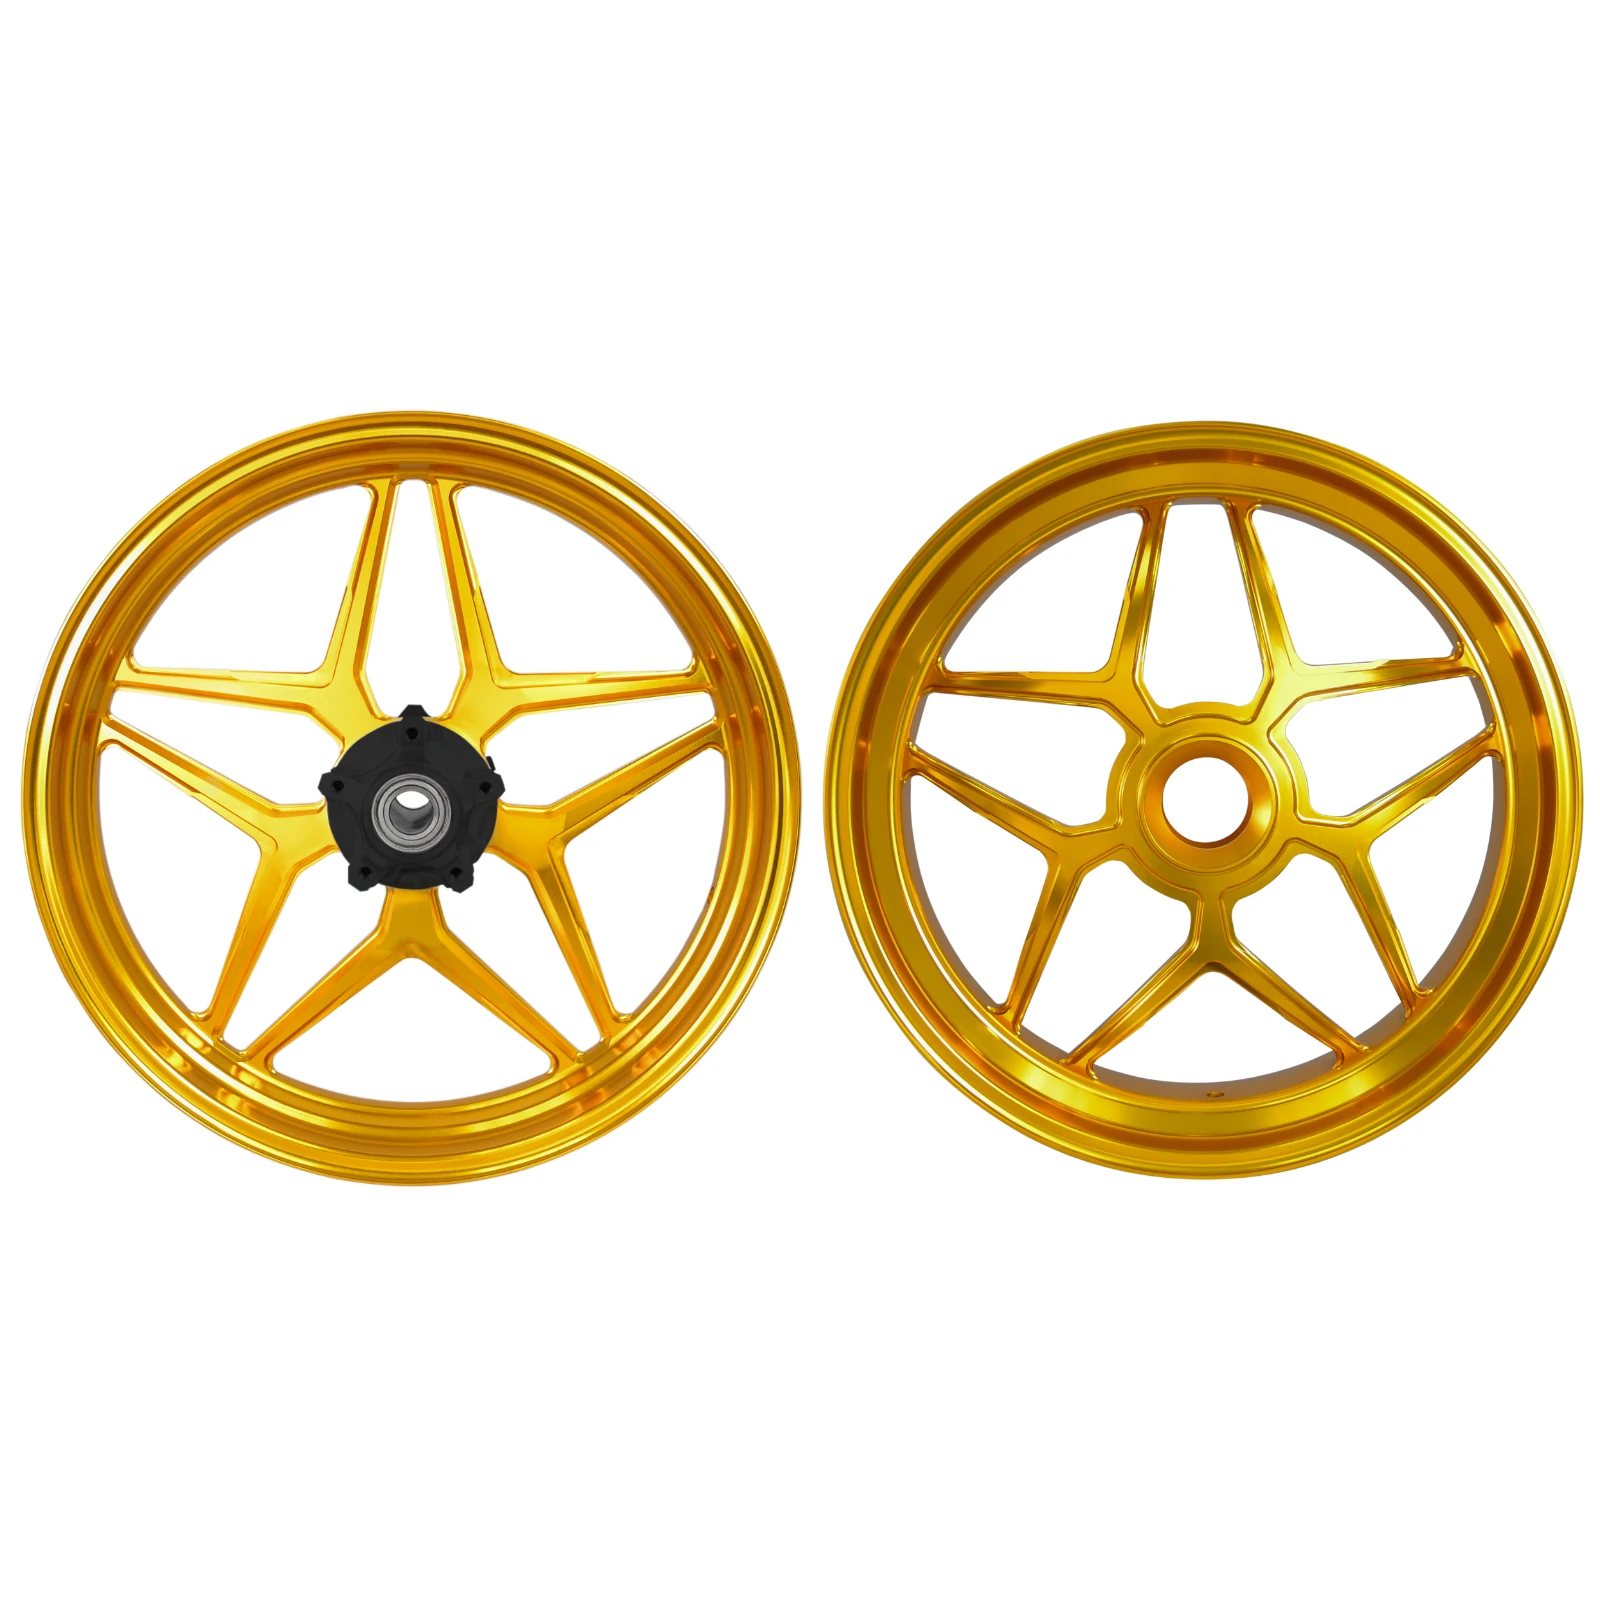 
MOS Forged Aluminum Alloy Motorcycle Rim Wheel for Ducati Panigale V4 1199 1198 1299  (1700006241230)